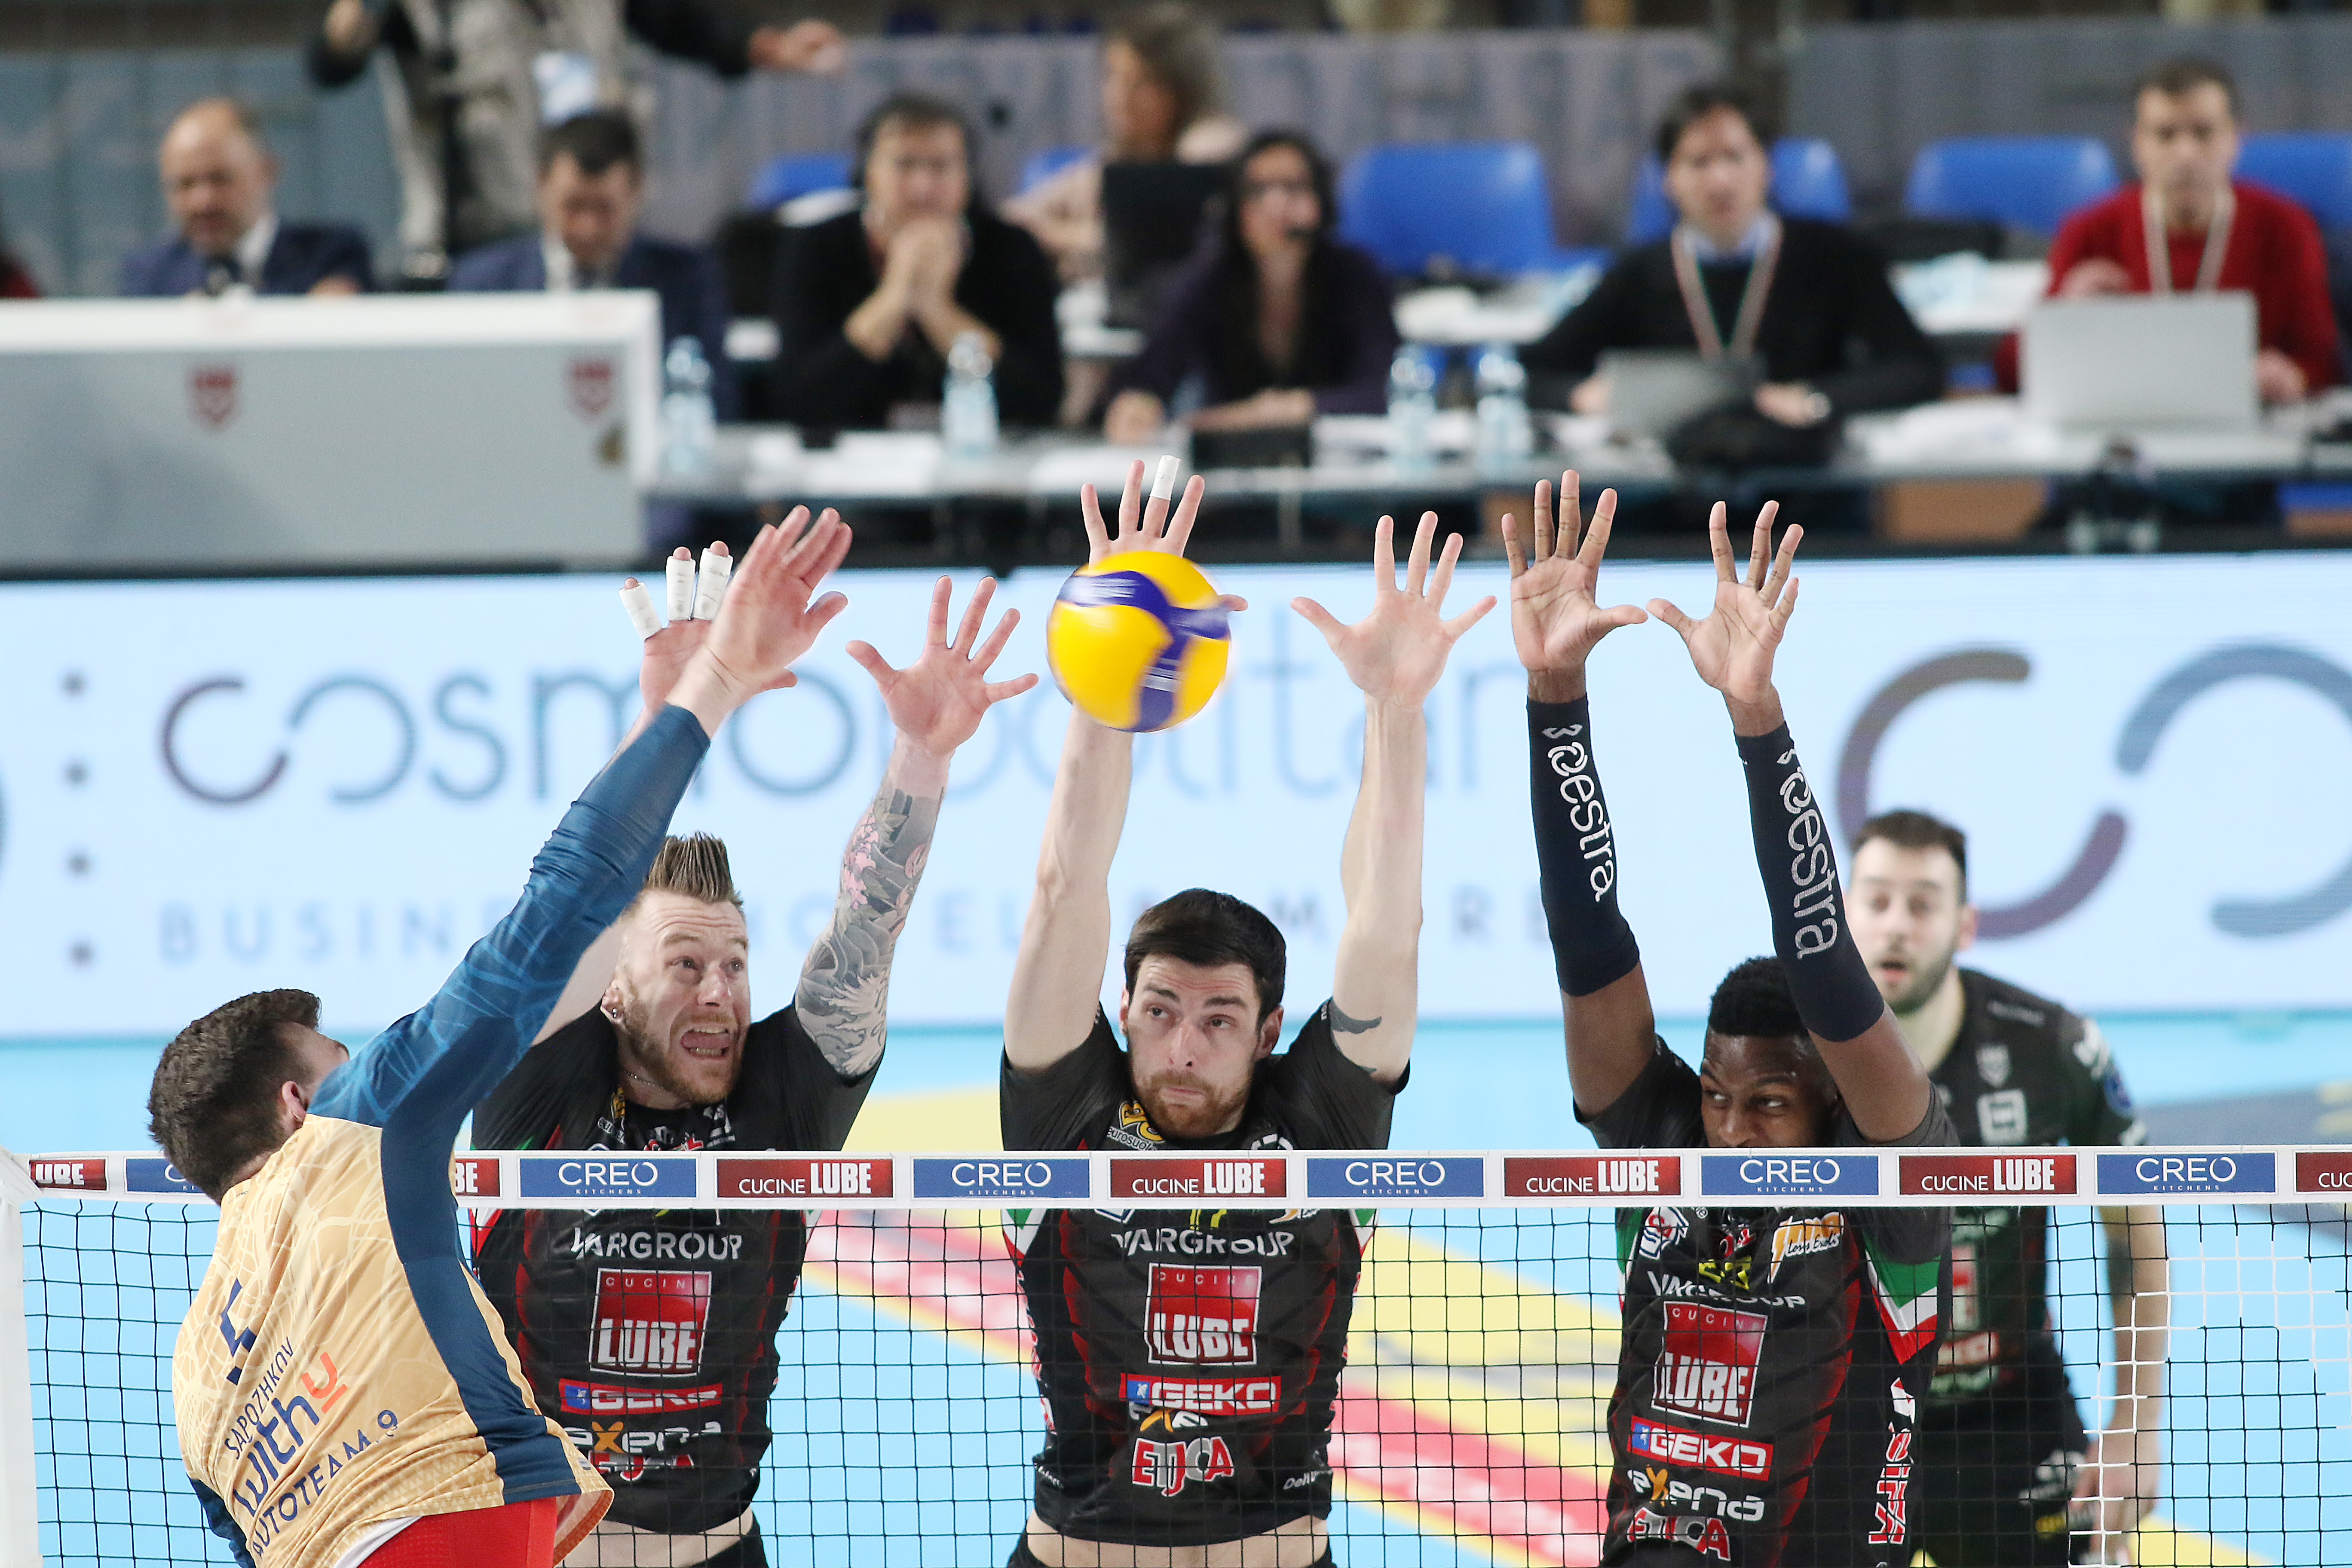 Lube, Milano, Piacenza and Monza looking to tie quarterfinal series volleyballworld